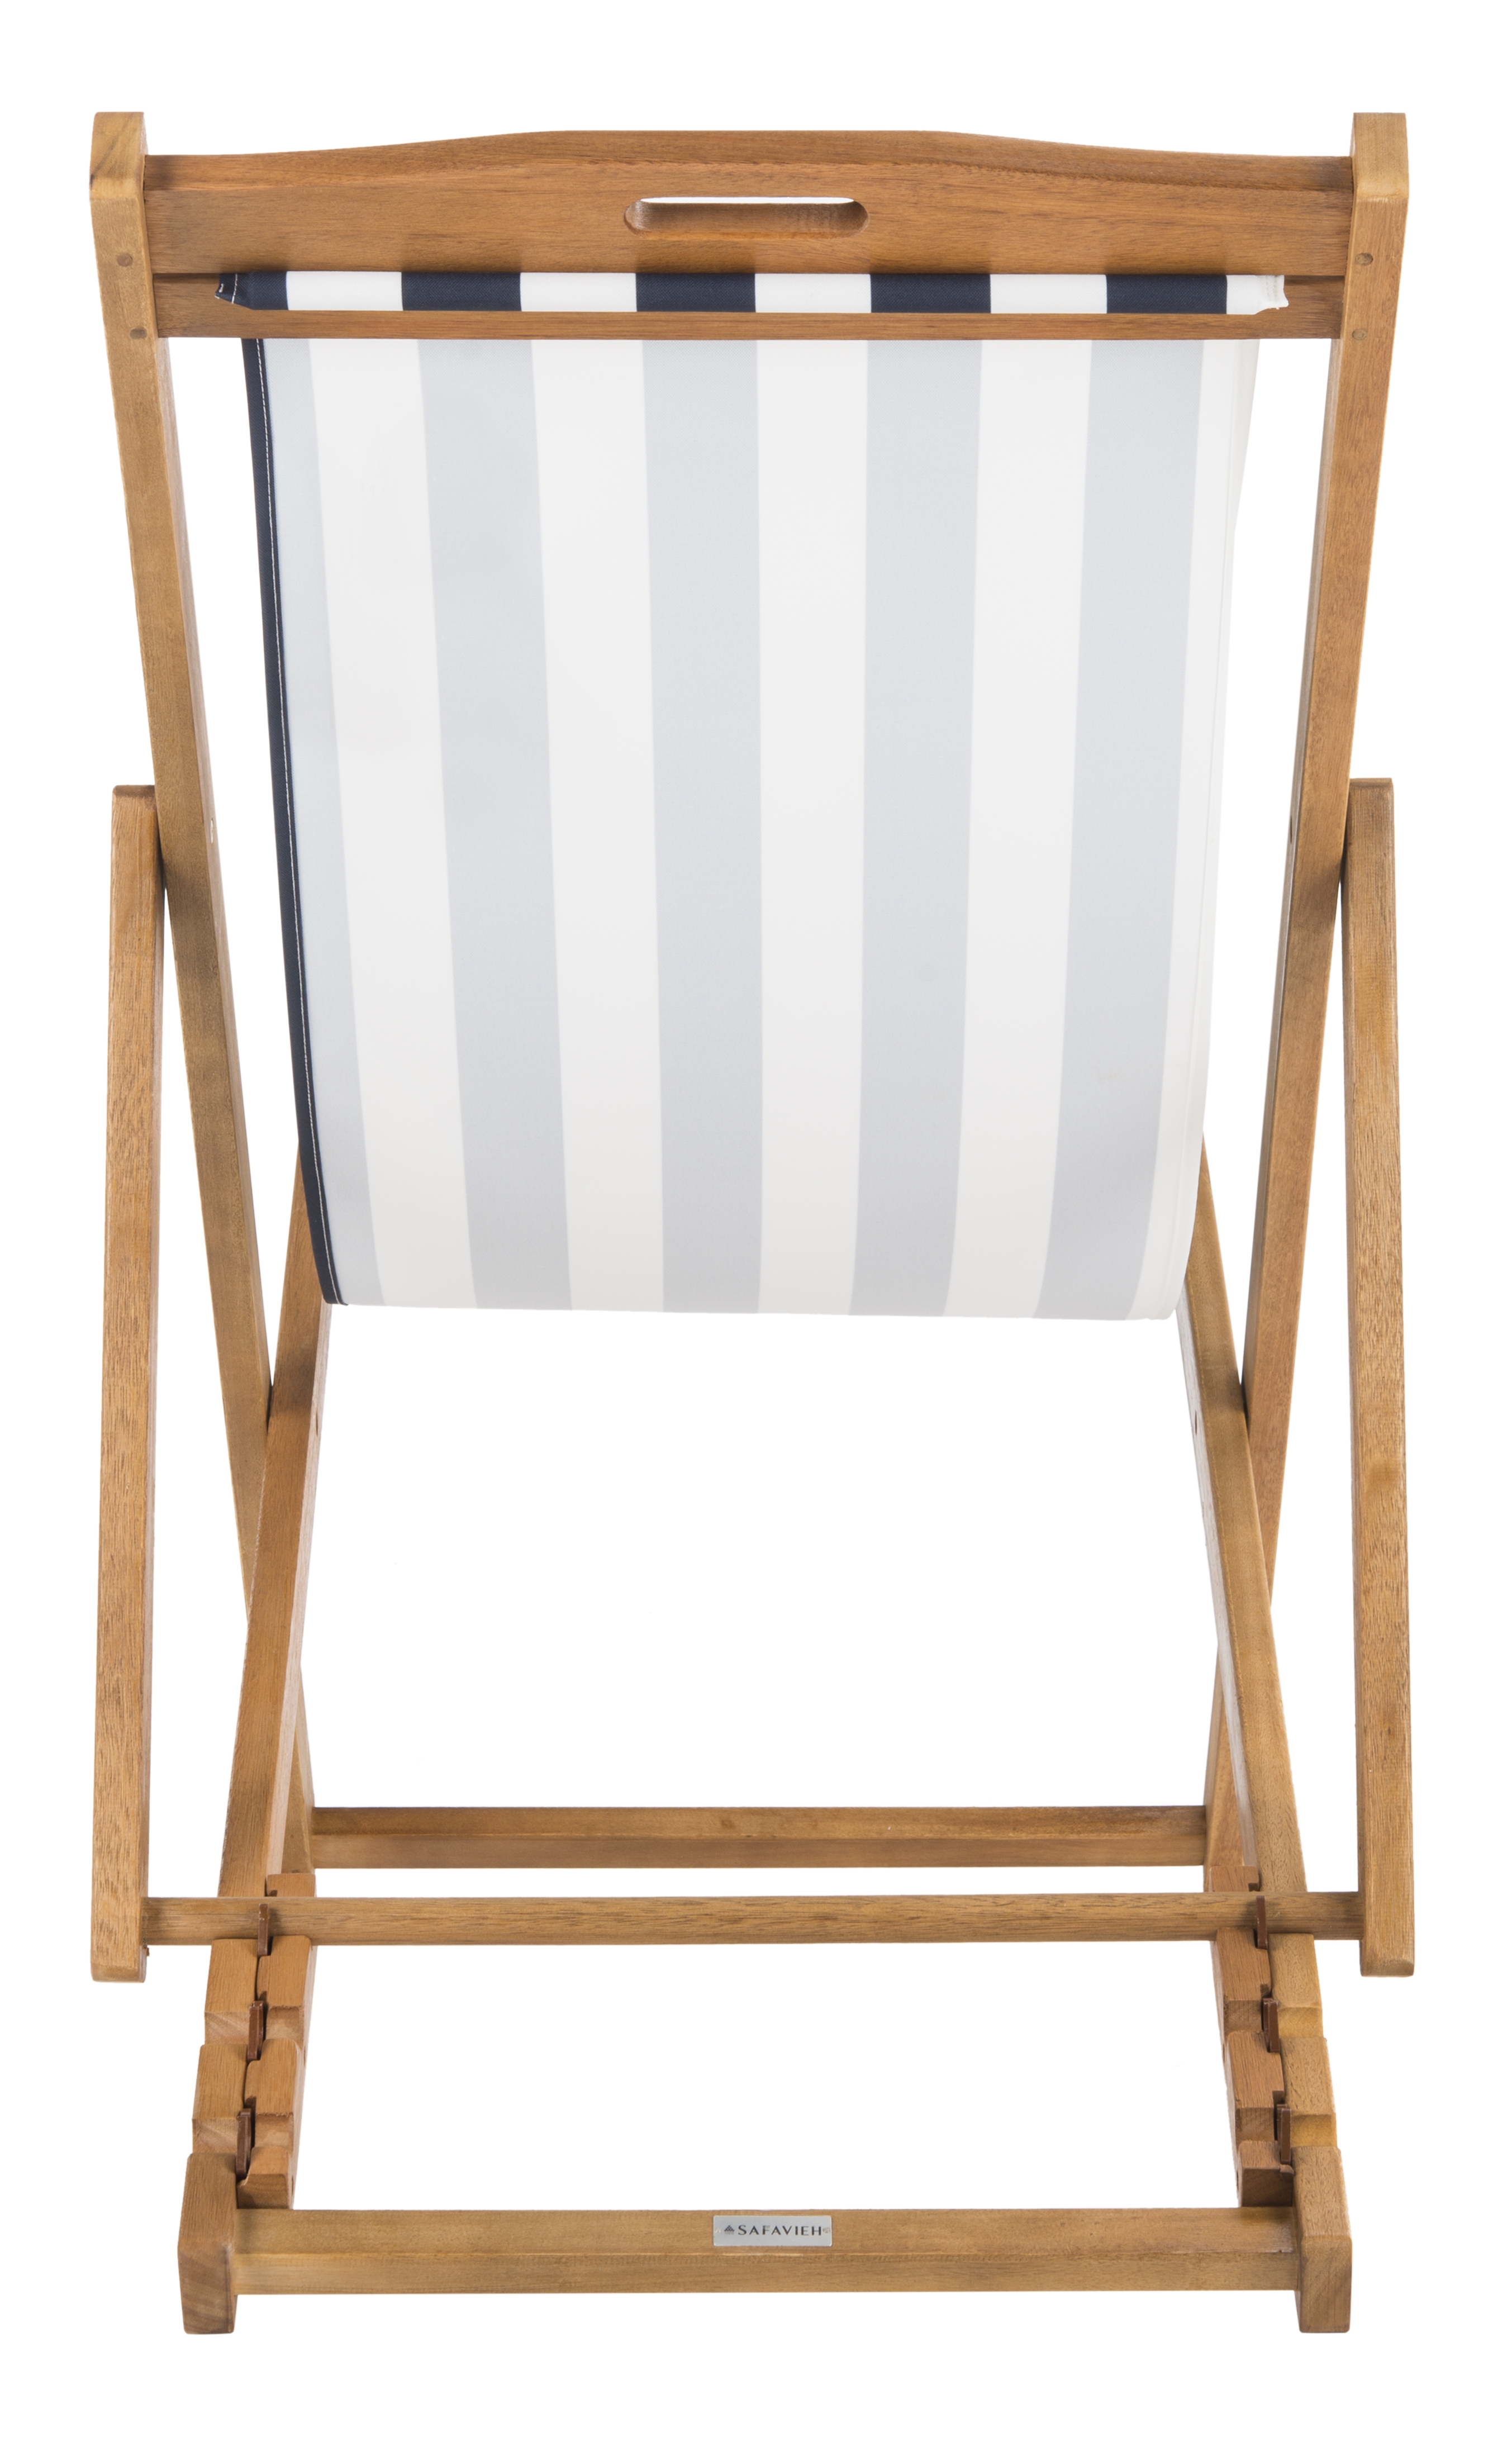 Loren Foldable Sling Chair - Natural/Navy/White - Arlo Home - Image 4